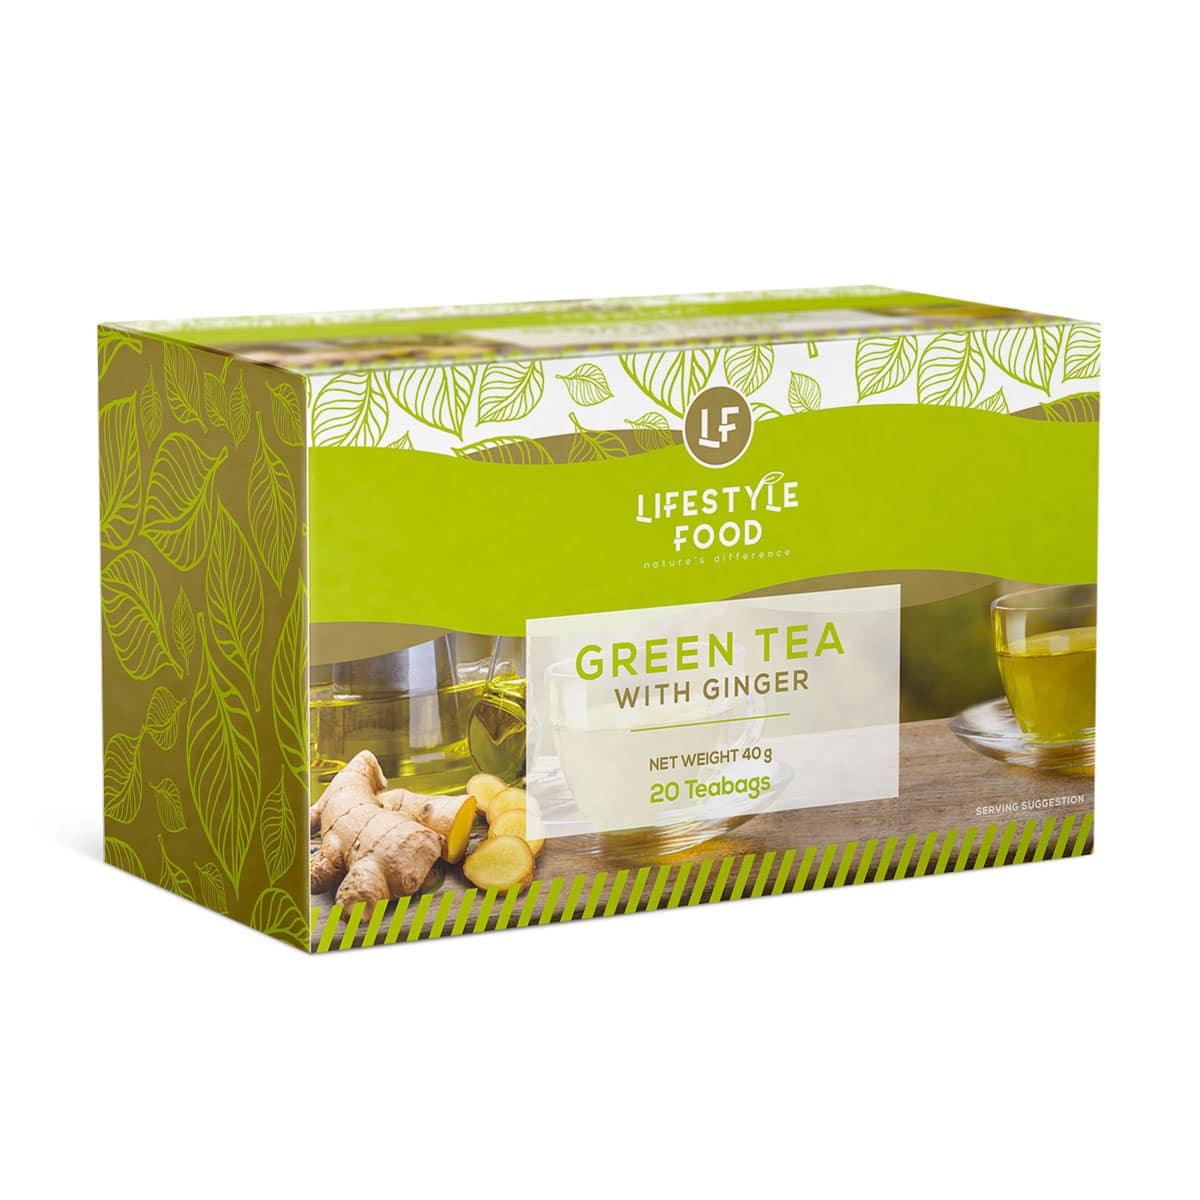 Lifestyle Food Green Tea Ginger - 20 Teabags